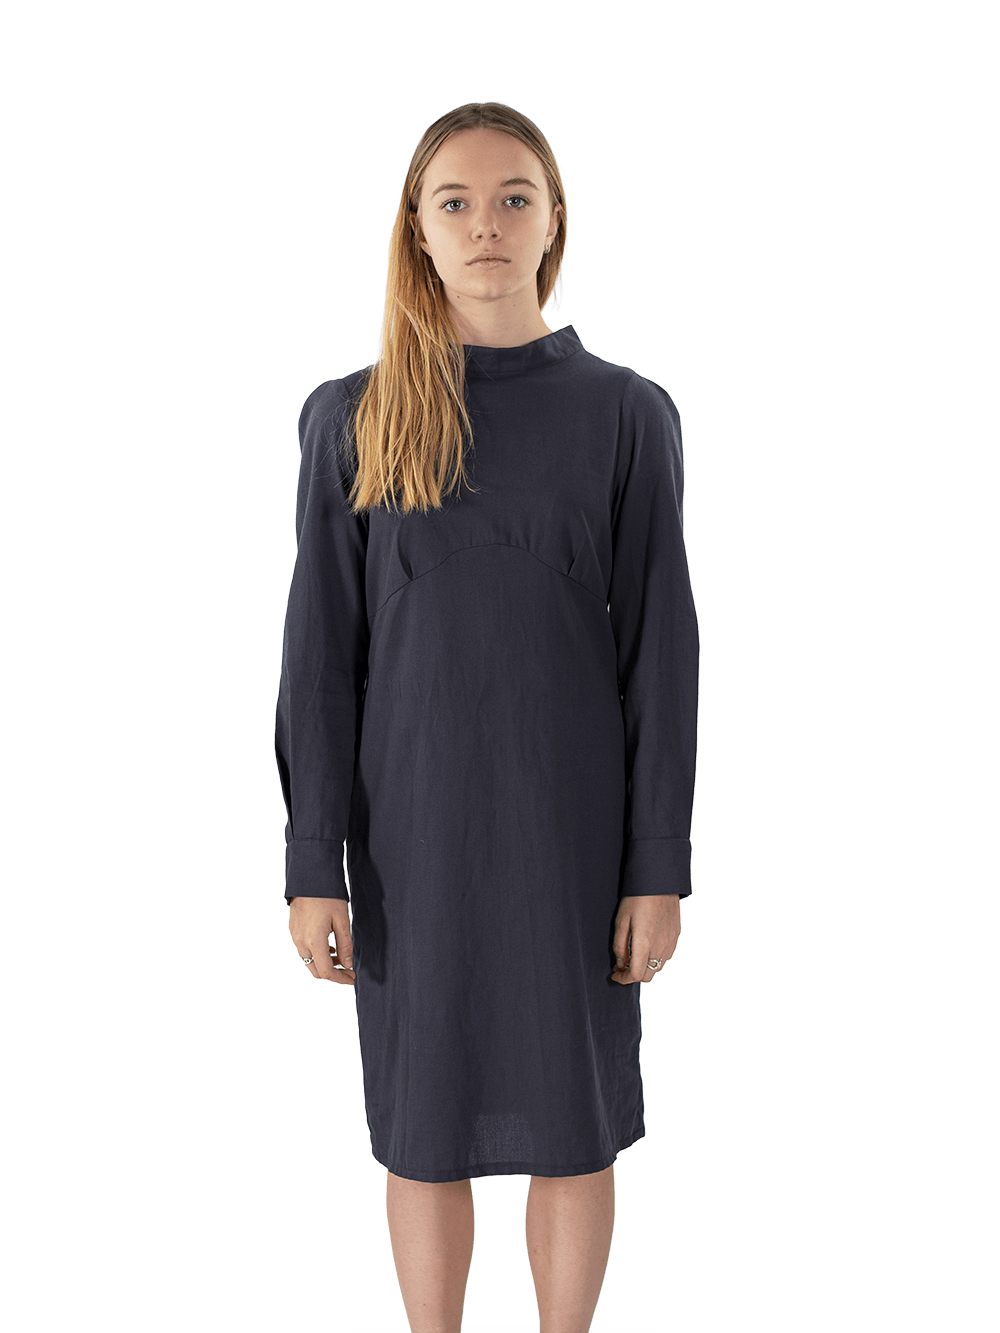 Long-Sleeve Dress of Organic Cotton and High Neckline